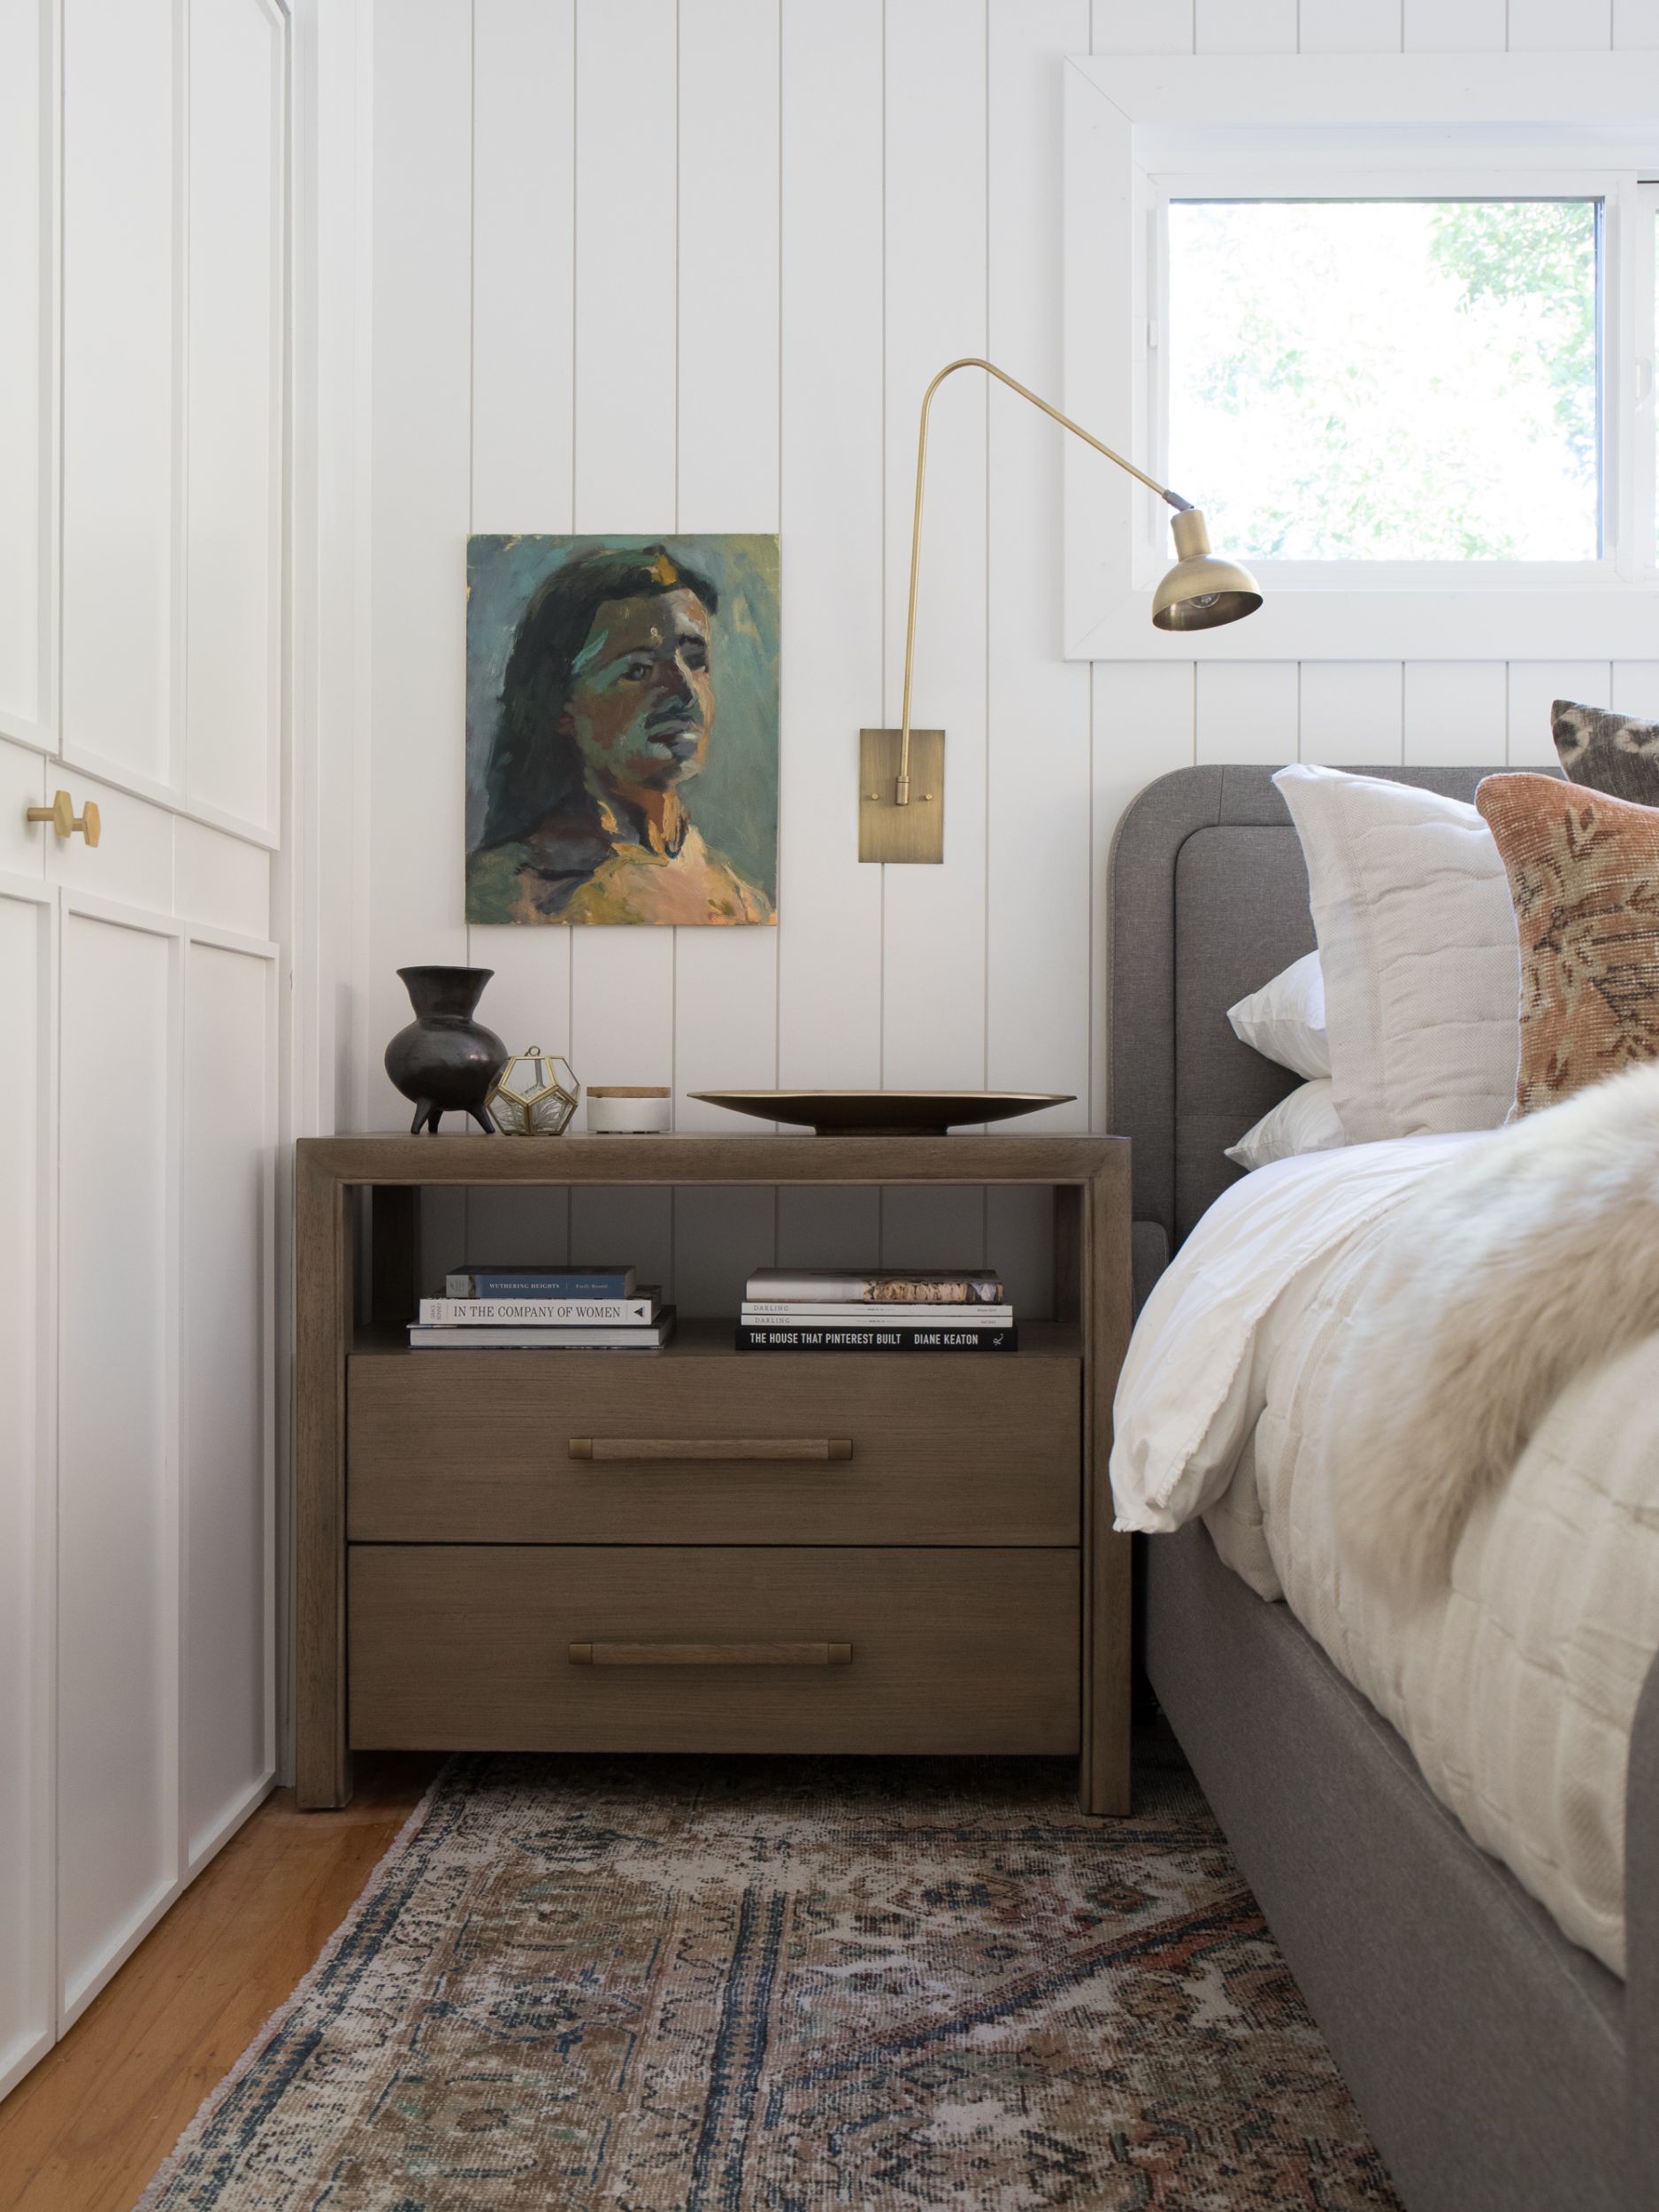 Wall Sconces by the Bed: Get Inspired!